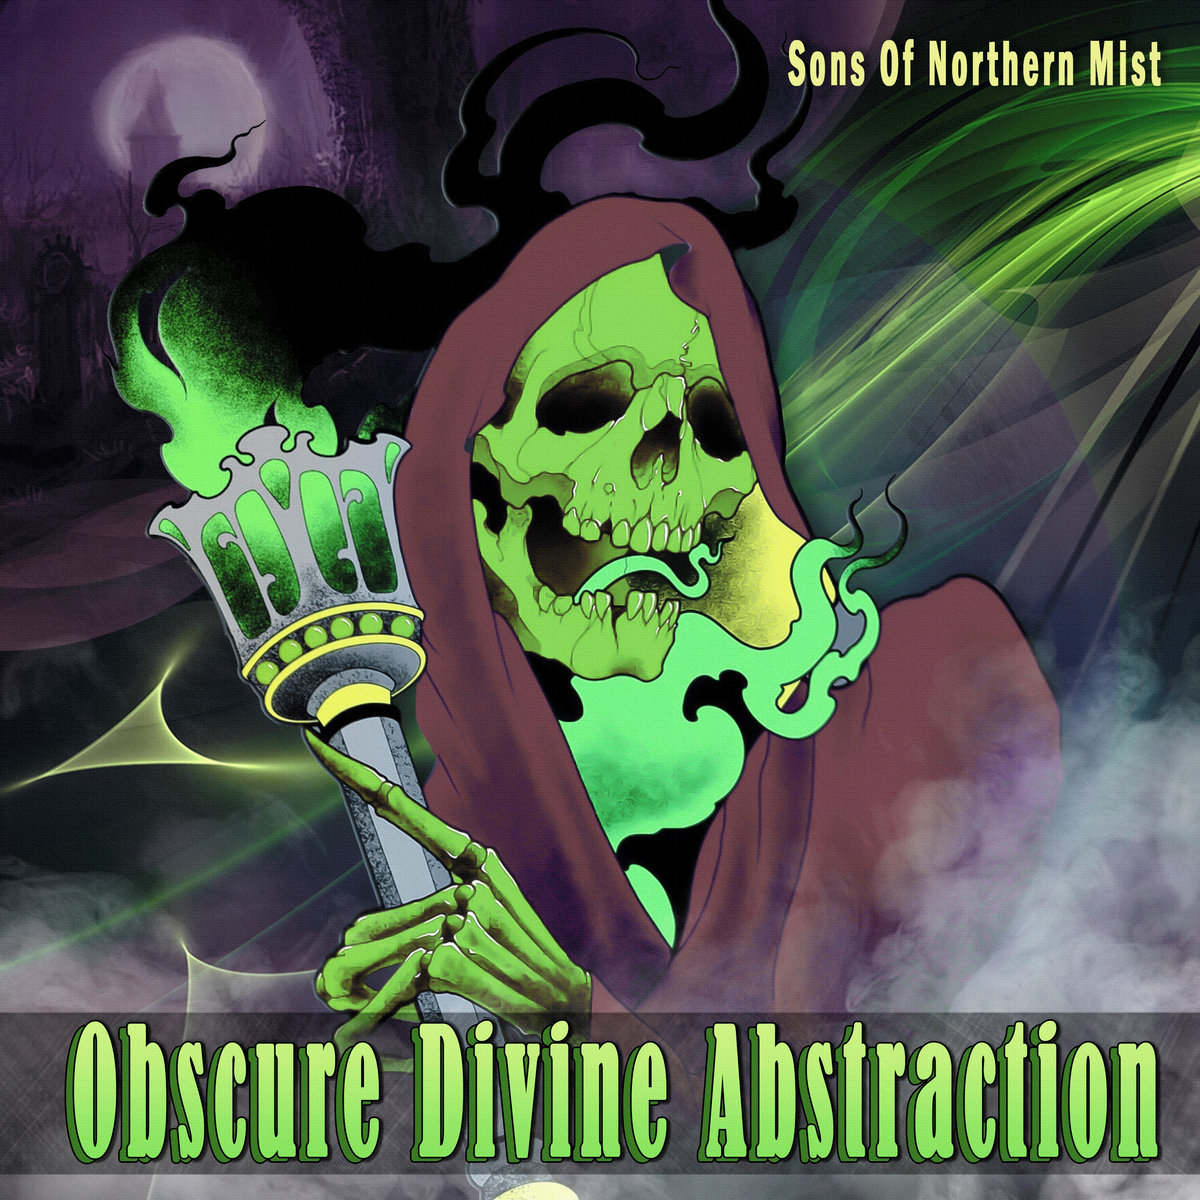 2021: Obscure Divine Abstraction